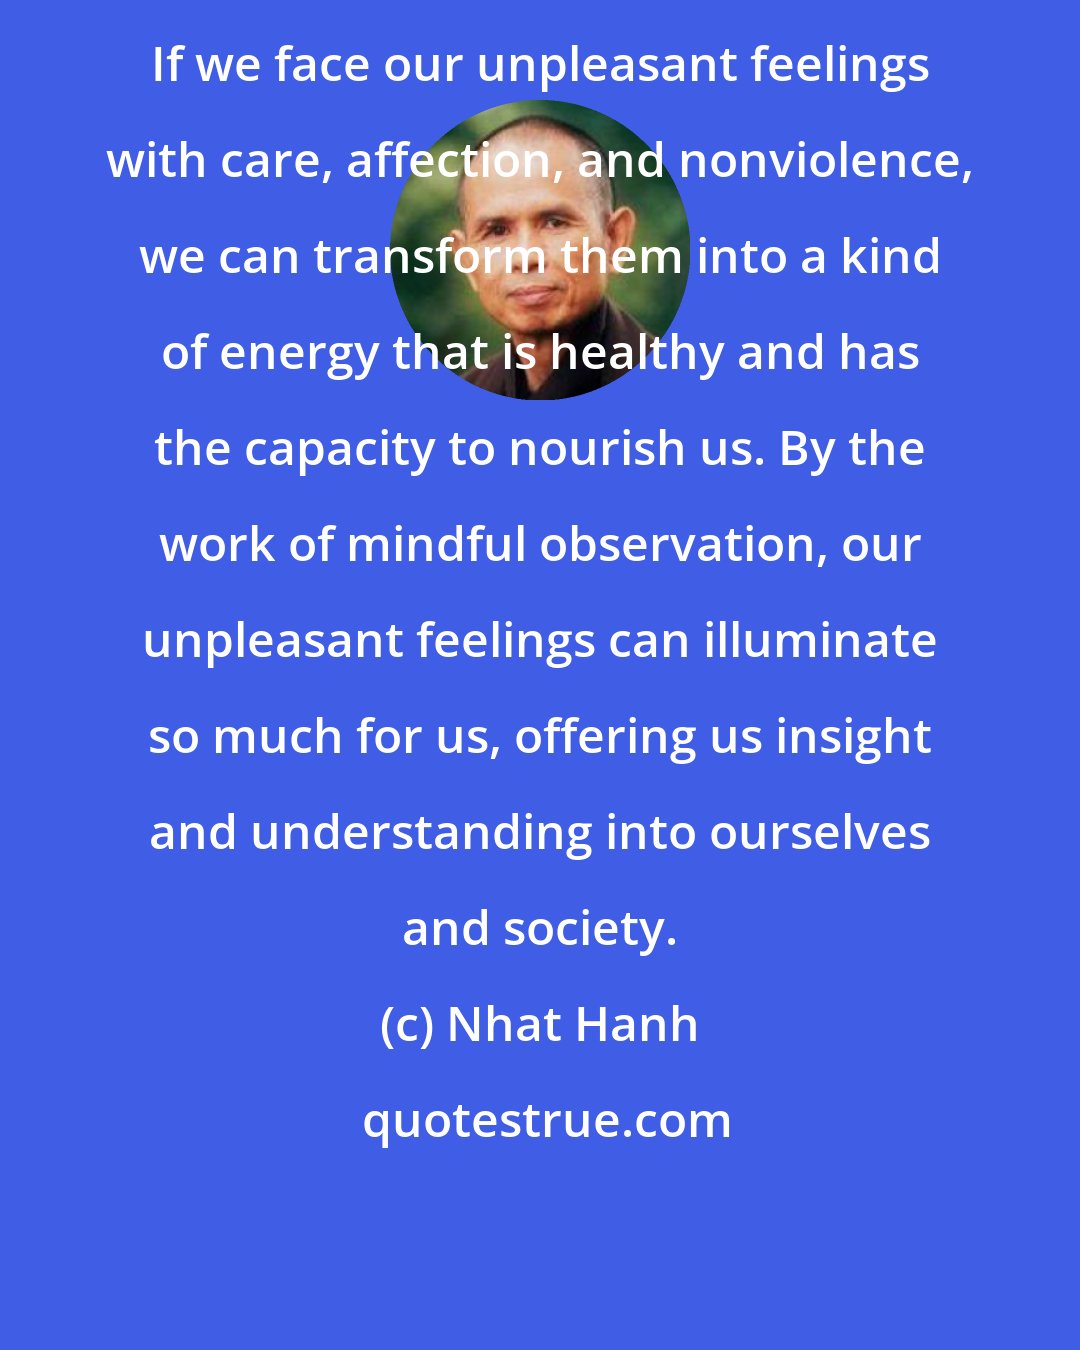 Nhat Hanh: If we face our unpleasant feelings with care, affection, and nonviolence, we can transform them into a kind of energy that is healthy and has the capacity to nourish us. By the work of mindful observation, our unpleasant feelings can illuminate so much for us, offering us insight and understanding into ourselves and society.